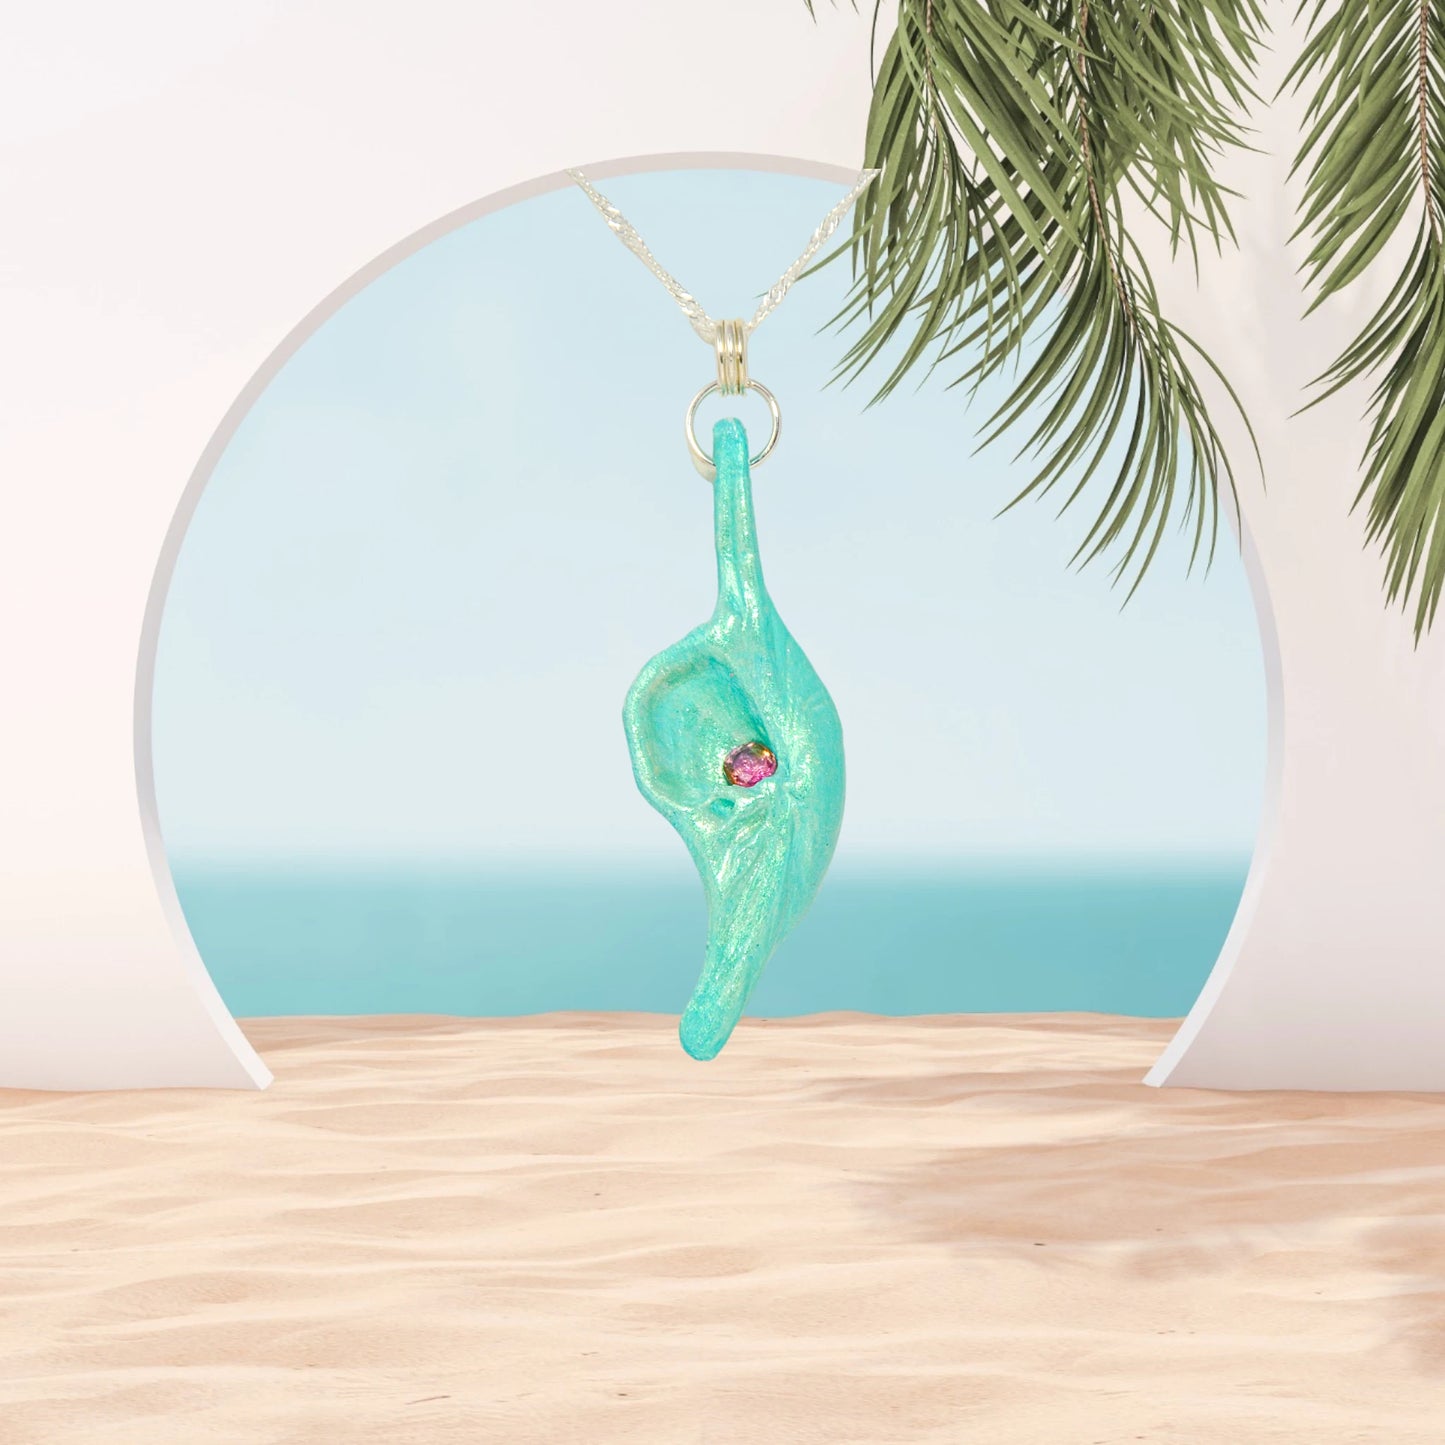 Rio is a natural seashell pendant with a faceted Pink Tourmaline gemstone. The pendant is shown hanging in an archway leading to the ocean.